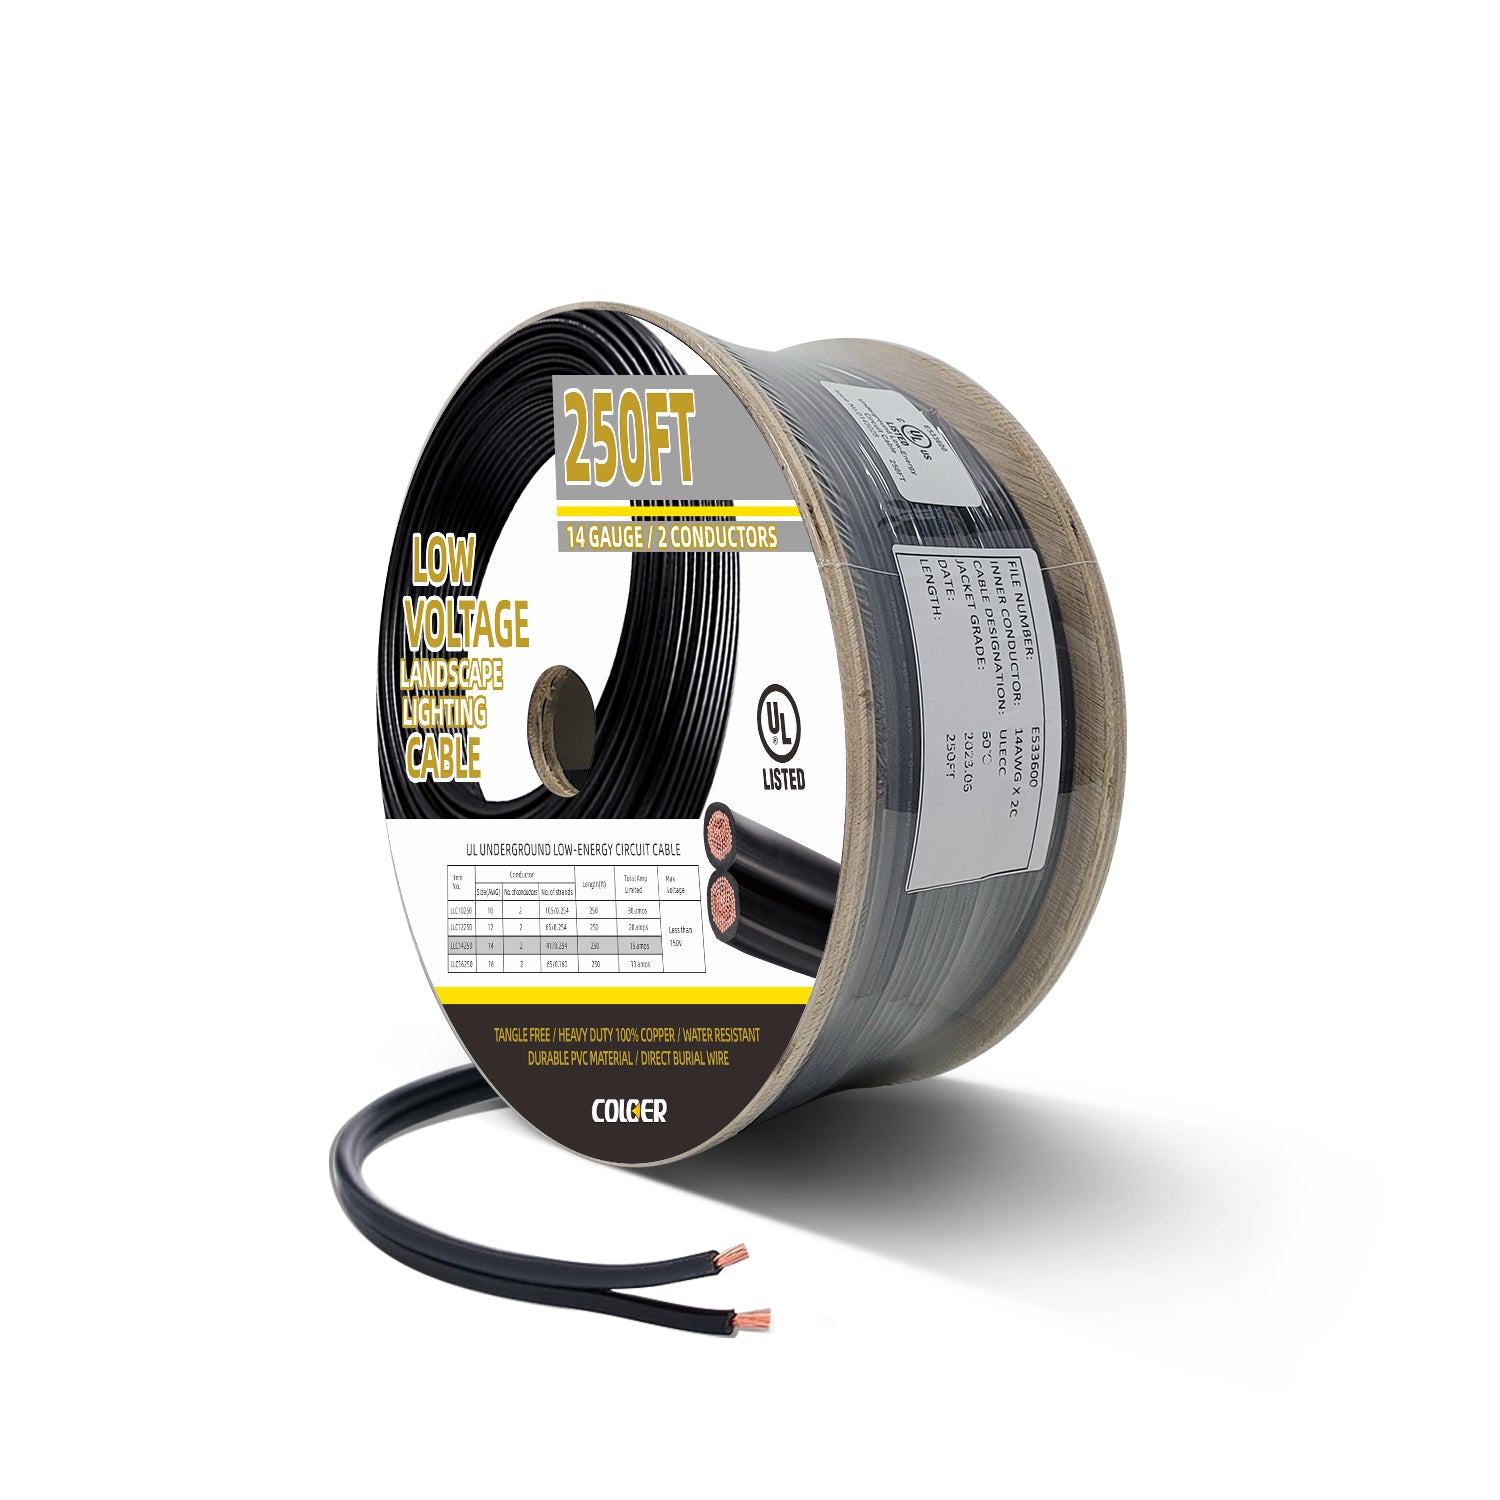 250 feet spool of COLOER's 14 gauge 2 conductor pure copper low voltage landscape cable for landscape lighting